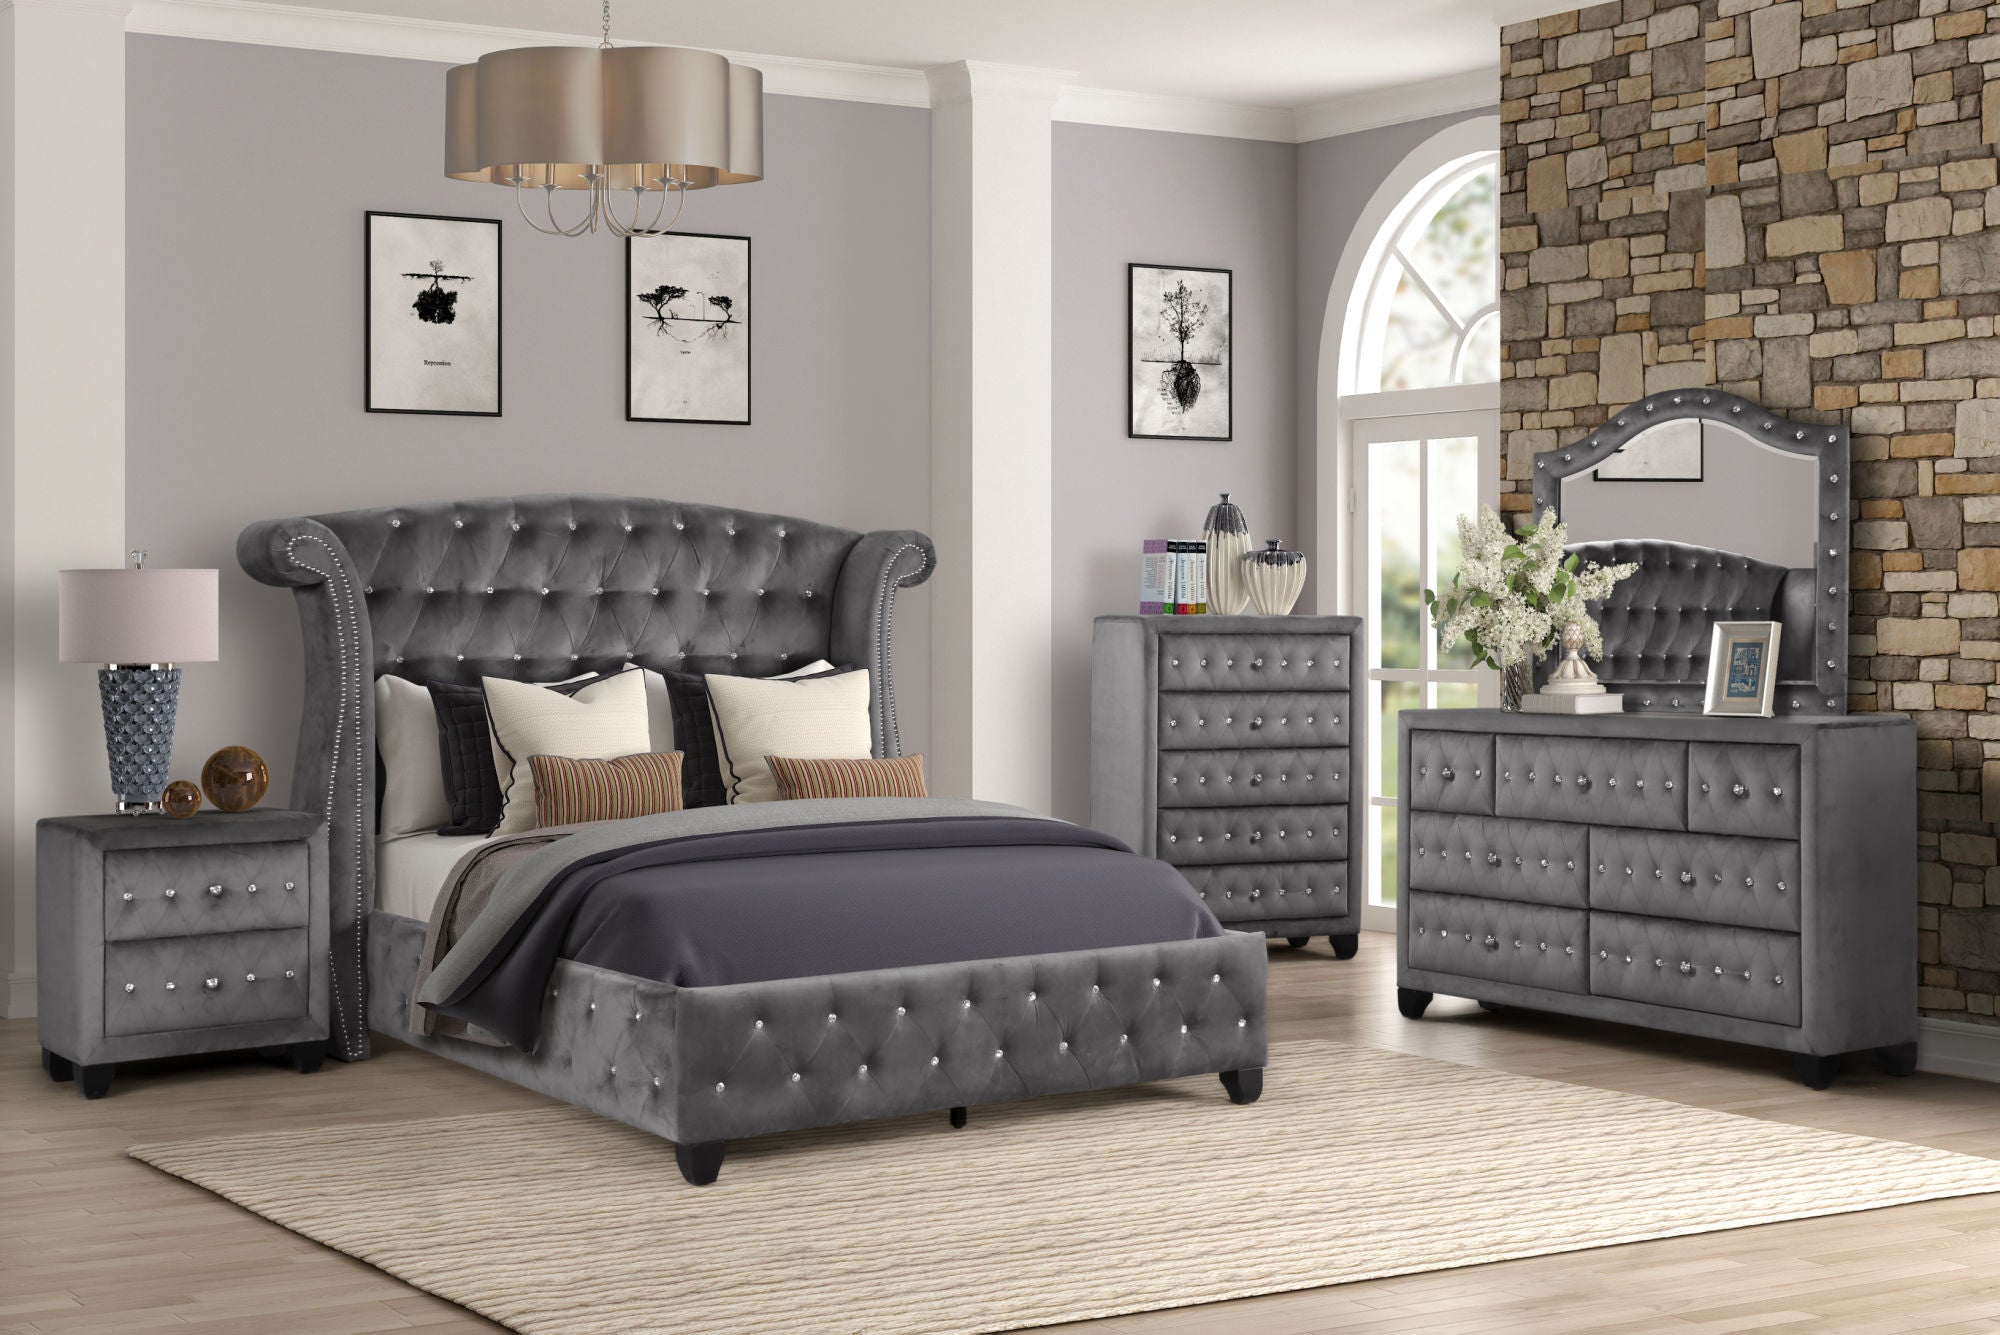 Sophia Queen 5-N Upholstery Bedroom Set Made With Wood in Gray